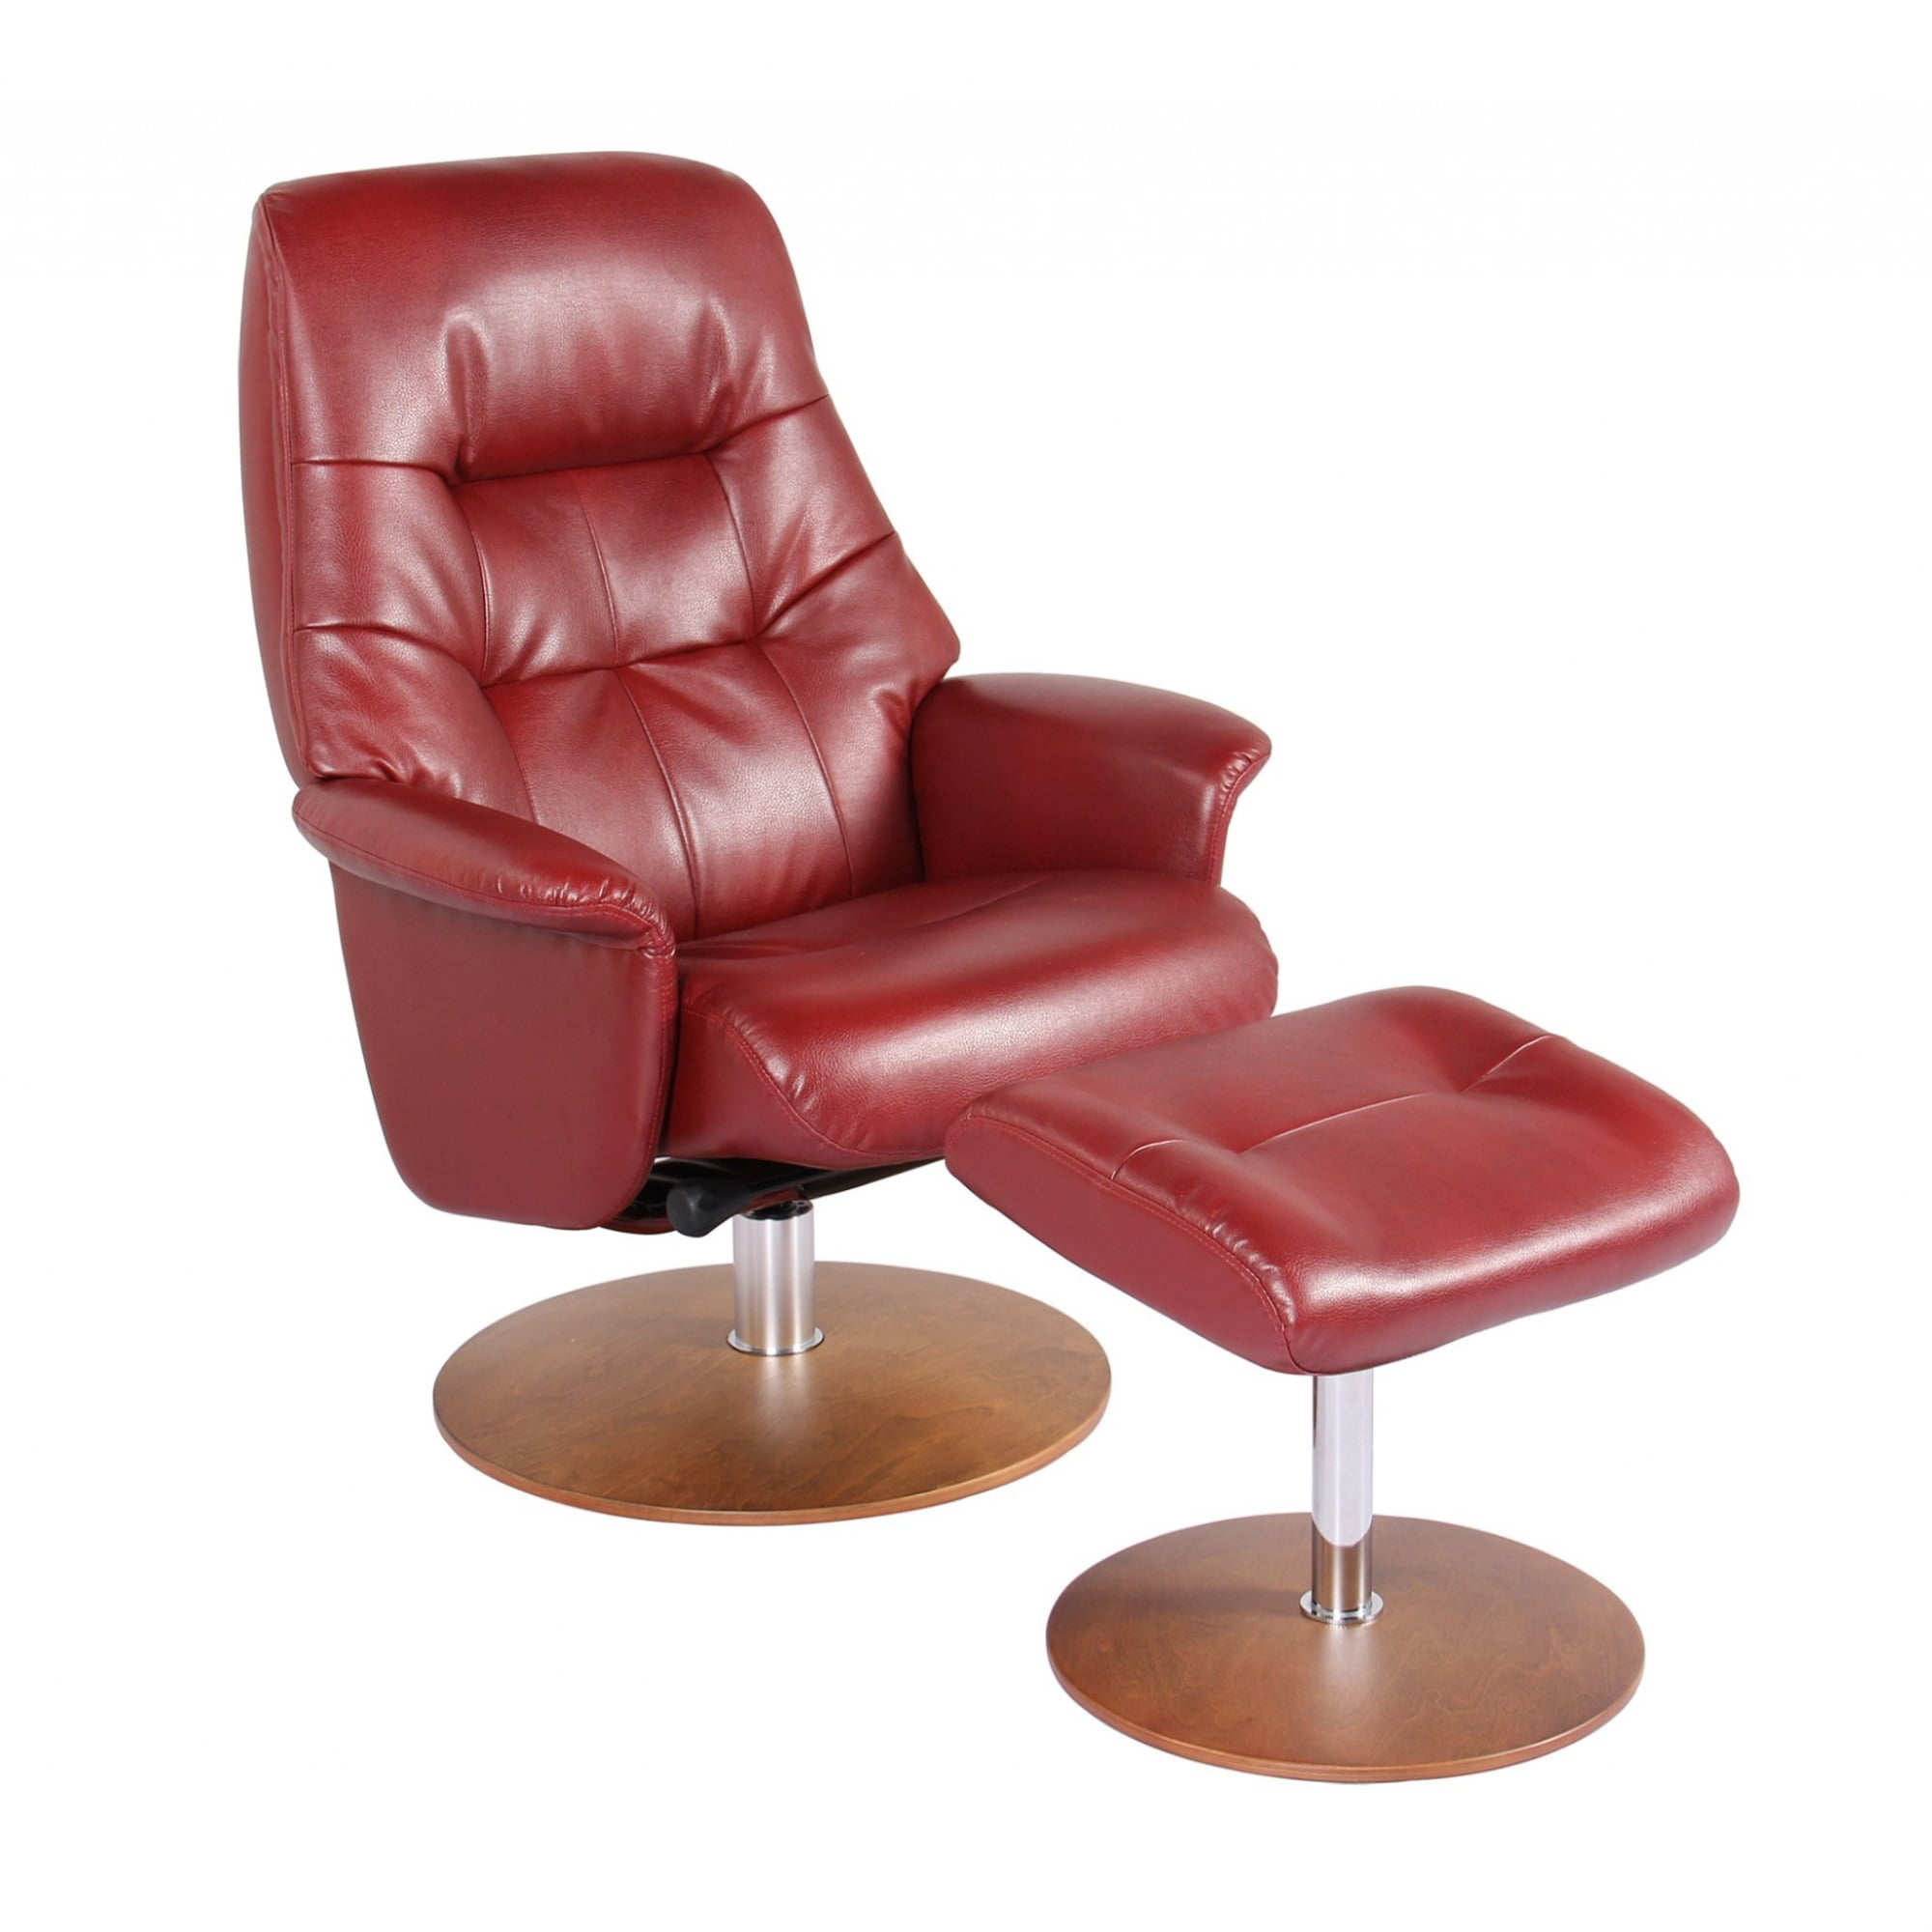 Contemporary Earthy Red Swivel Recliner, Red Leather Swivel Recliner Chair